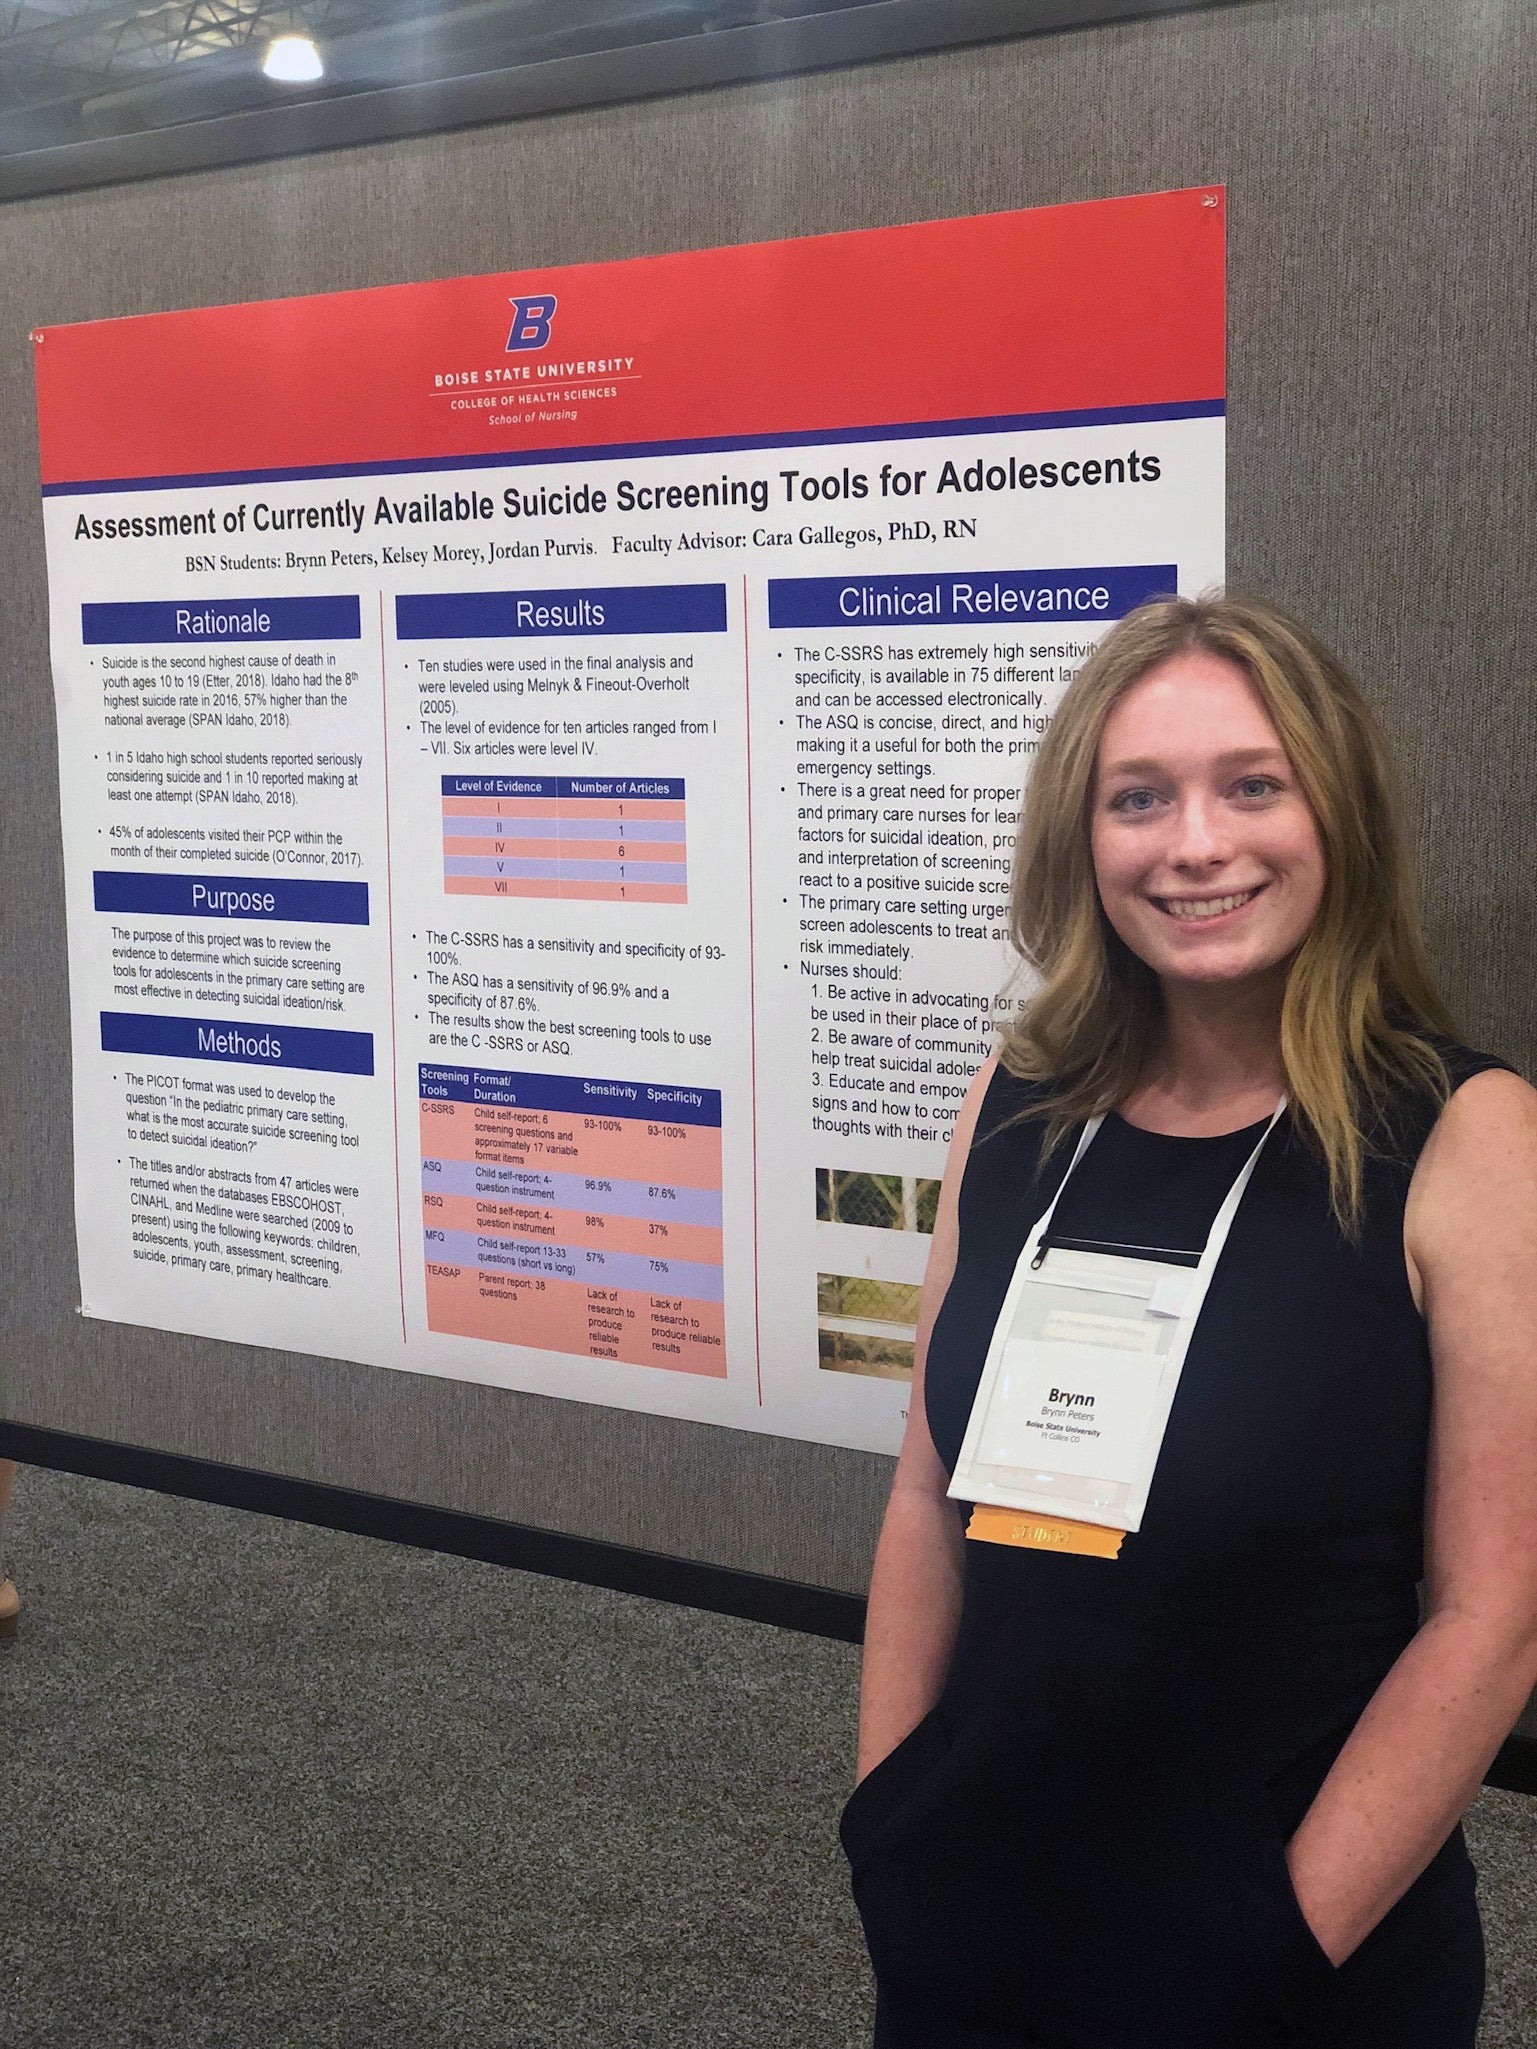 Brynn Peters with her poster "Assessment of Suicide Screening Tools for Adolescents"